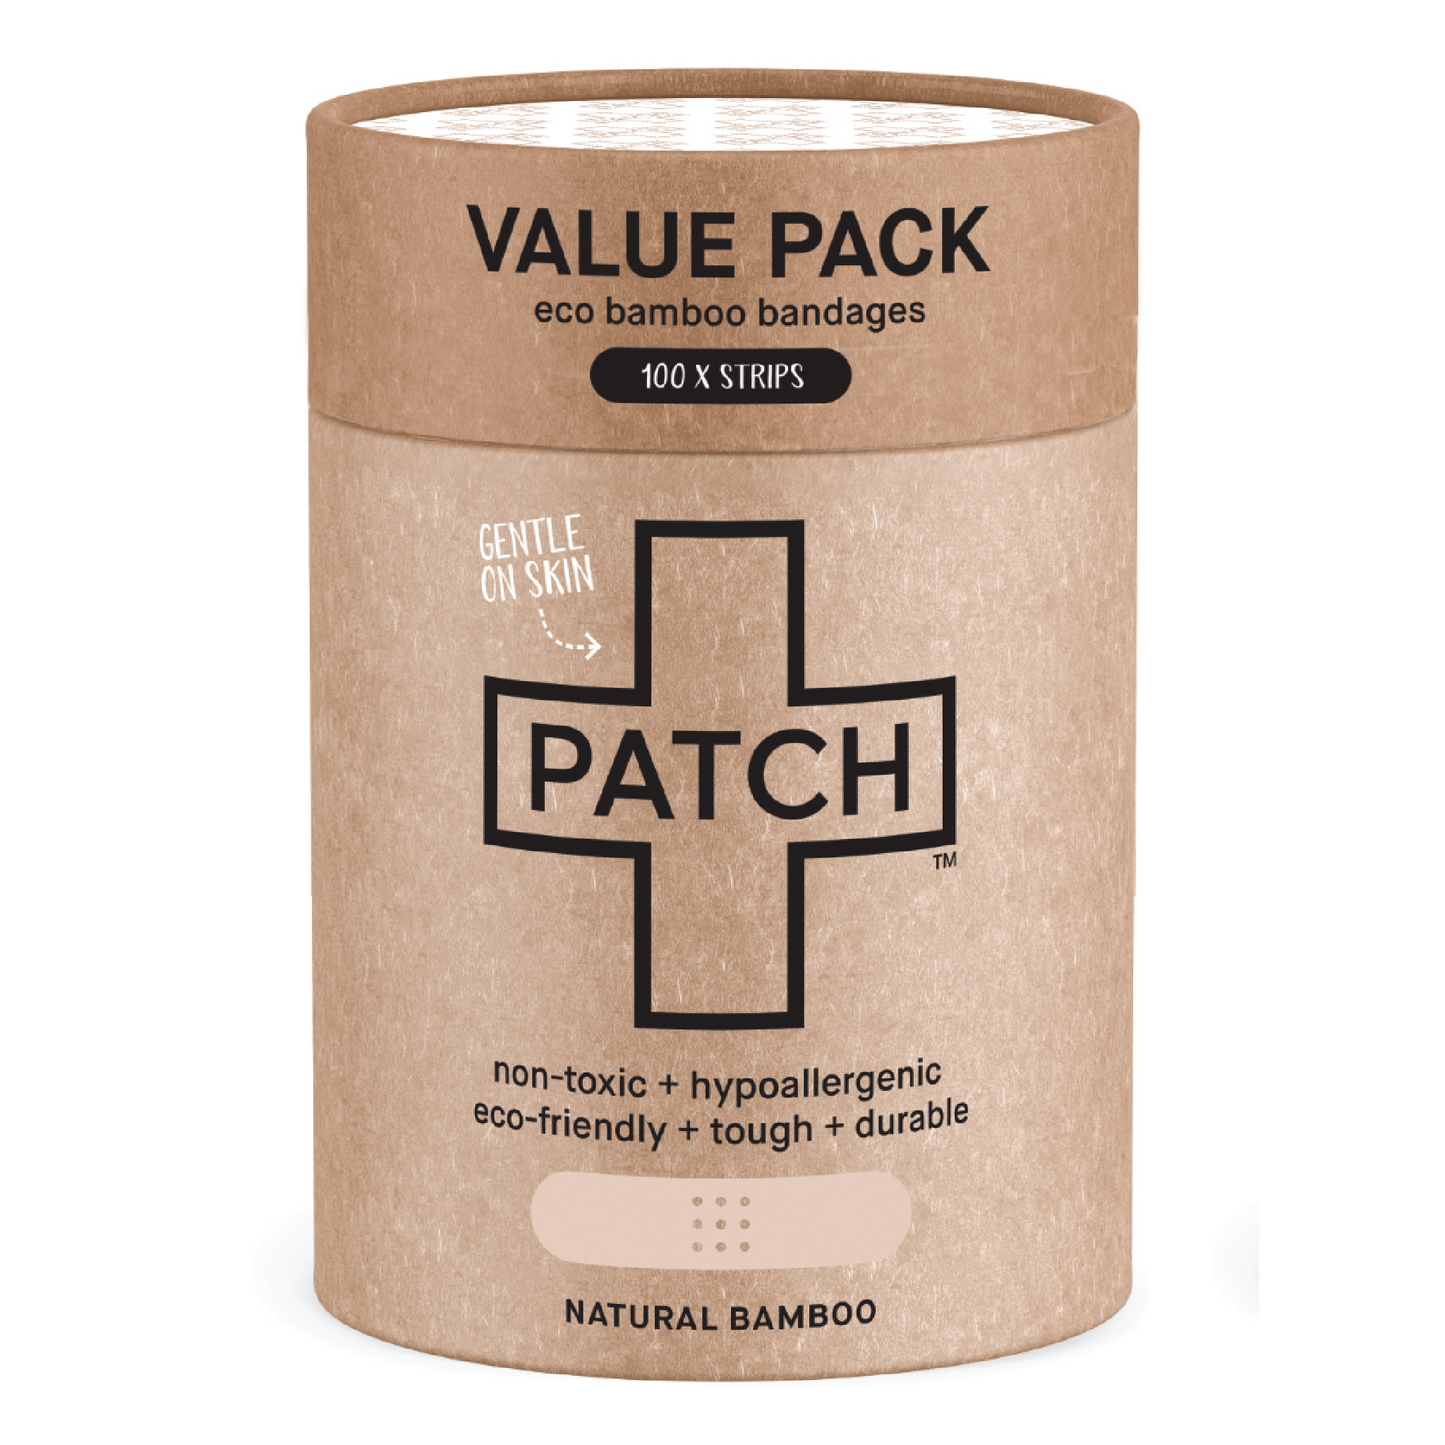 Patch Natural Bamboo Bandages for sensitive skin, eco friendly, hypoallergenic, non-toxic, latex free, Value Pack